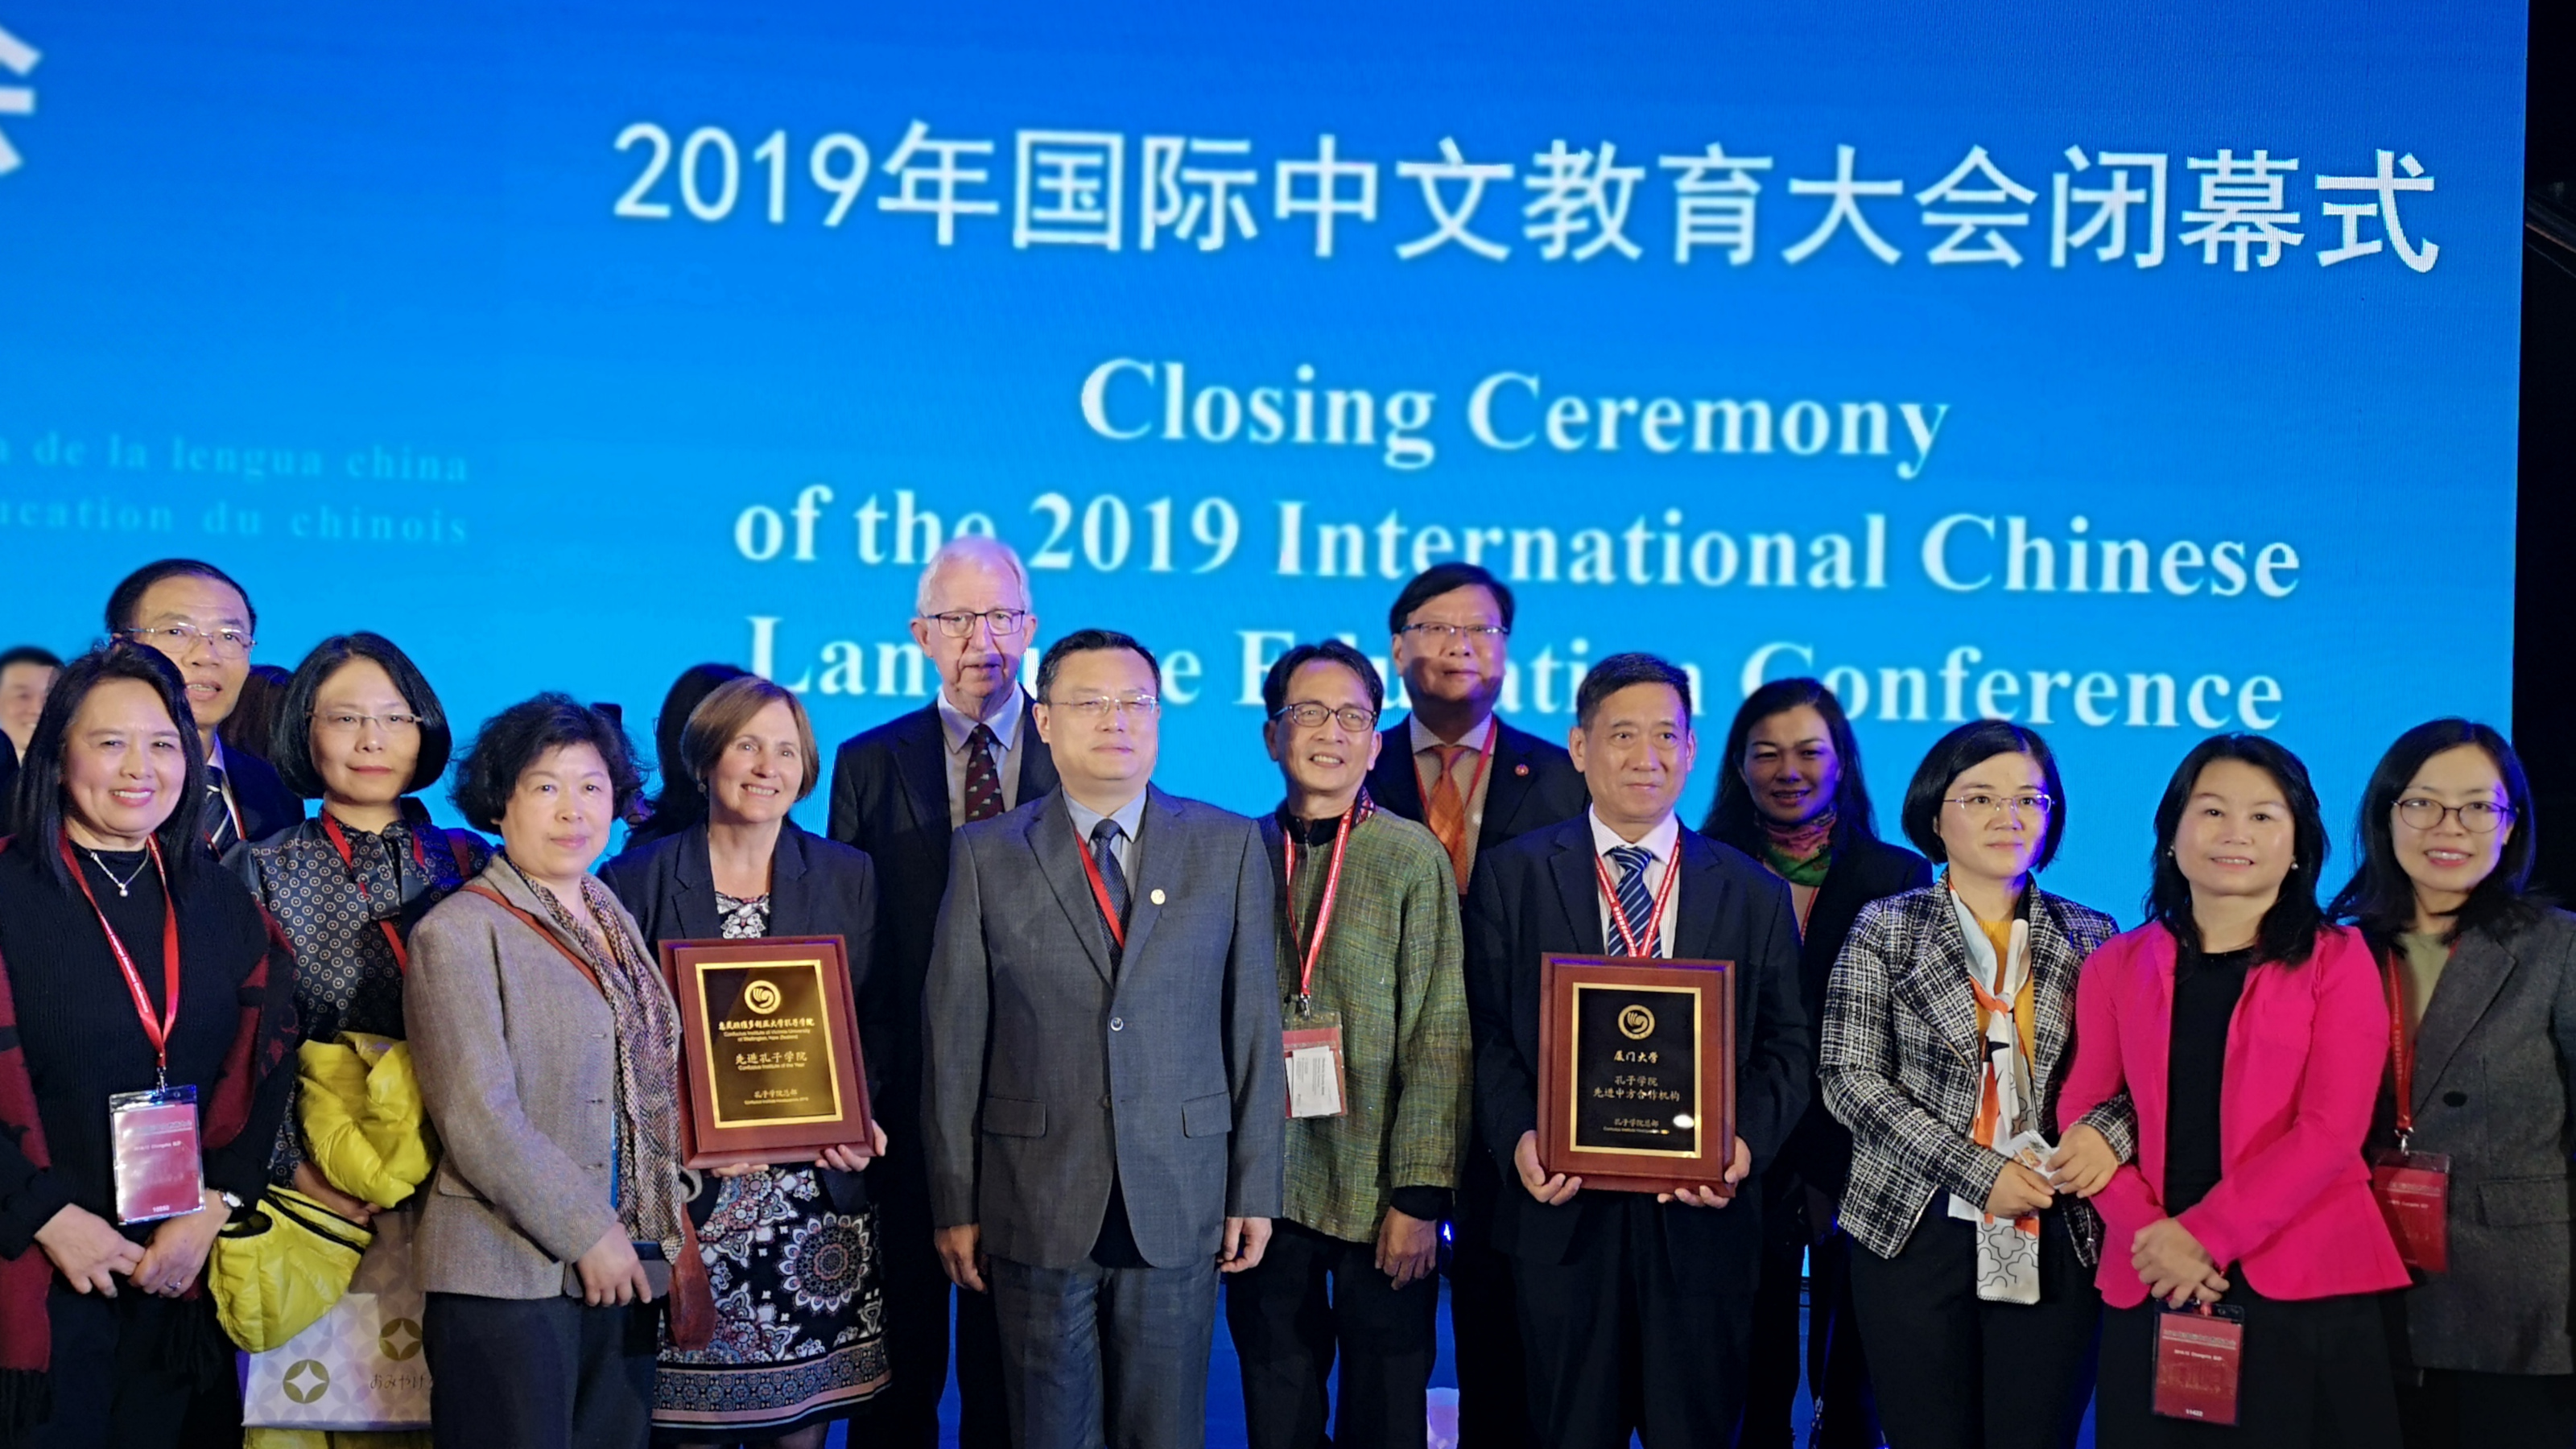 Staff of the Wellington Confucius Institute receive a '2019 Outstanding Confucius Institute' award. To the left of the Xiamen University President Zhang Rong (centre) are Chairman Tony Browne, Director Adele Bryant (holding award) and Deputy Director Zhao Yezhu